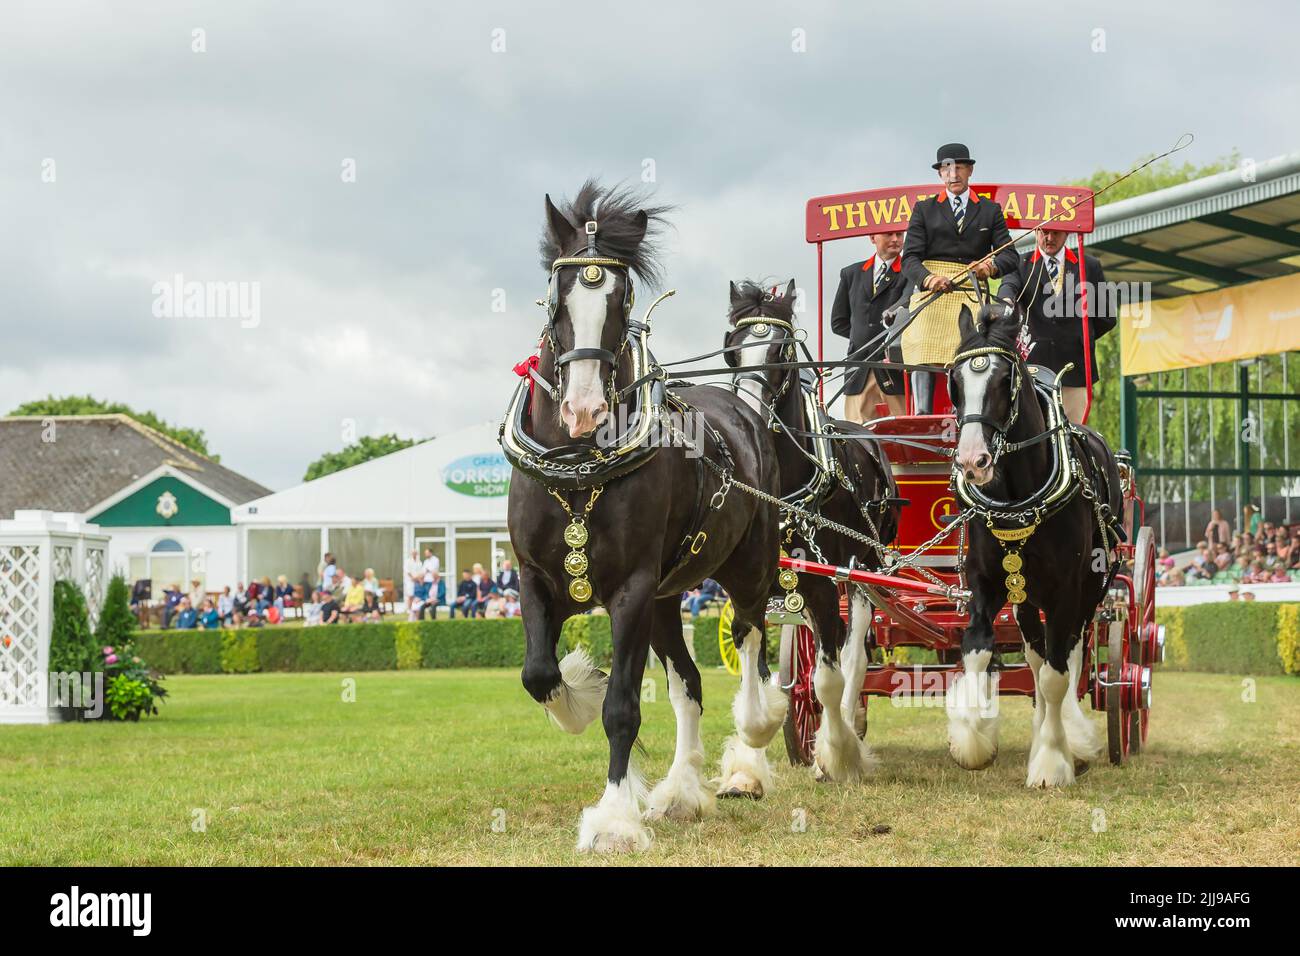 Great Yorkshire Show, Harrogate, UK. July 15, 2022. The Heavy Horse parade with Thwaites Ales, Reserve Champions, Three or more horse turnout team. Ho Stock Photo